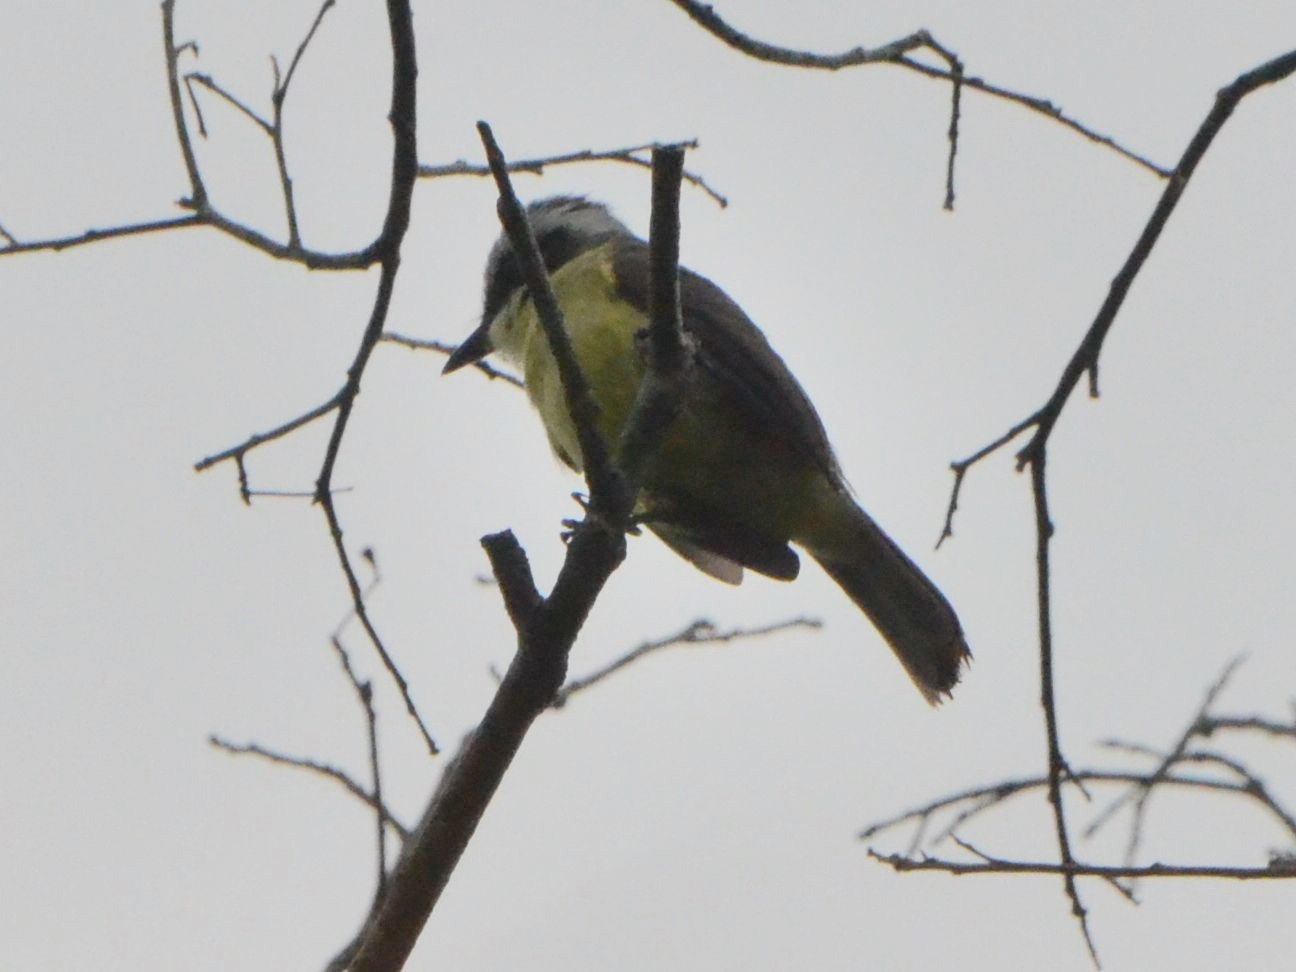 Click picture to see more Three-striped Flycatchers.